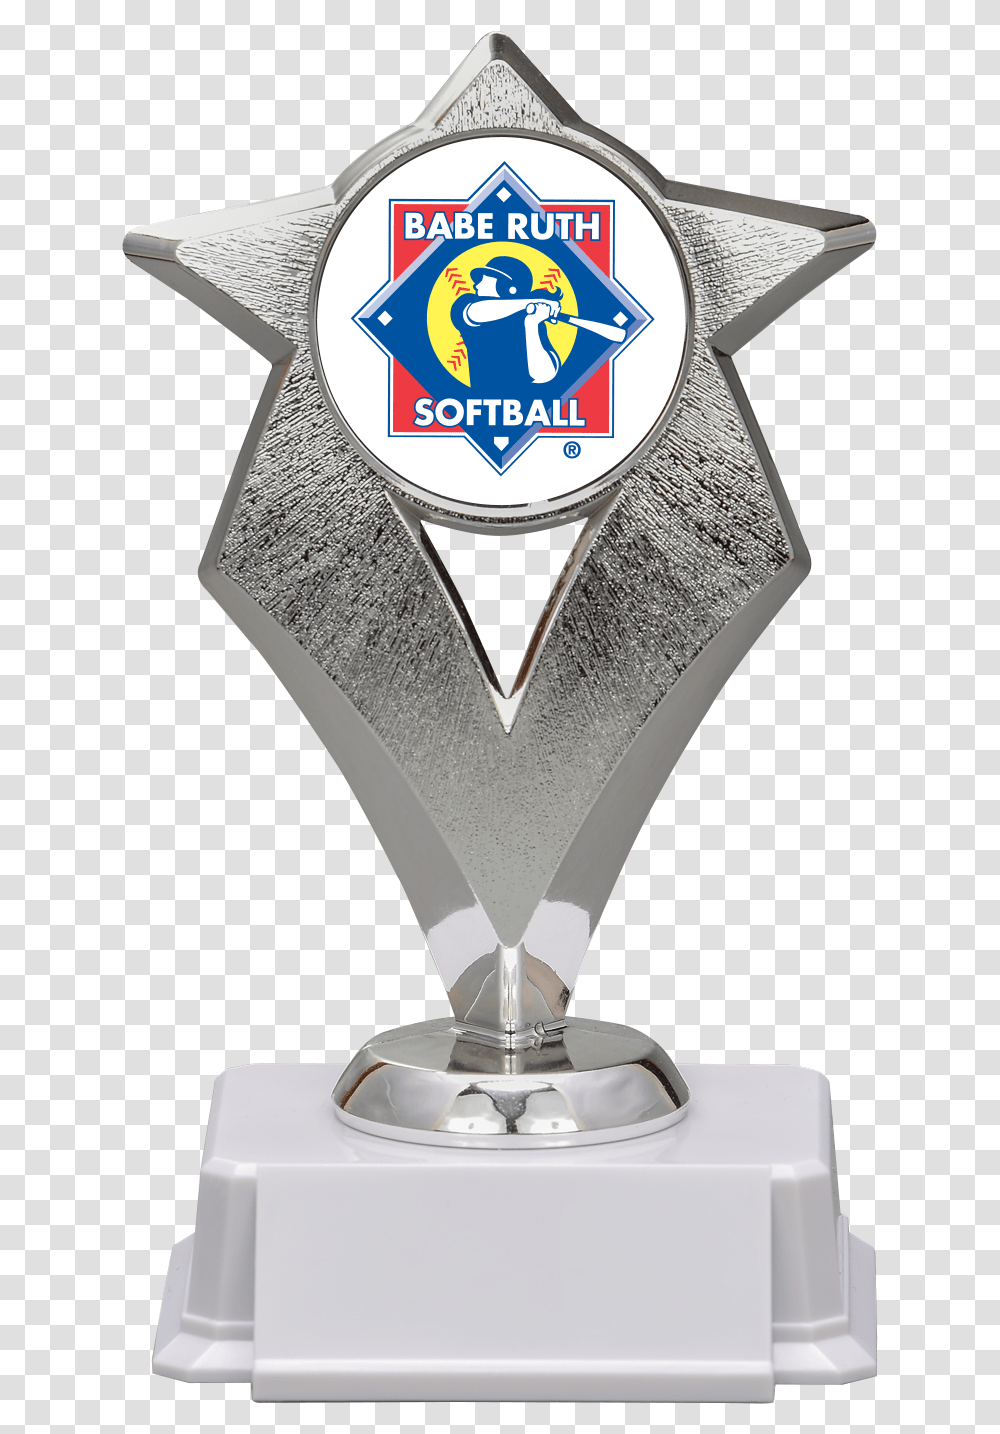 Silver Trophy Silver Star Trophy Babe Ruth Softball Babe Ruth Baseball, Lamp Transparent Png